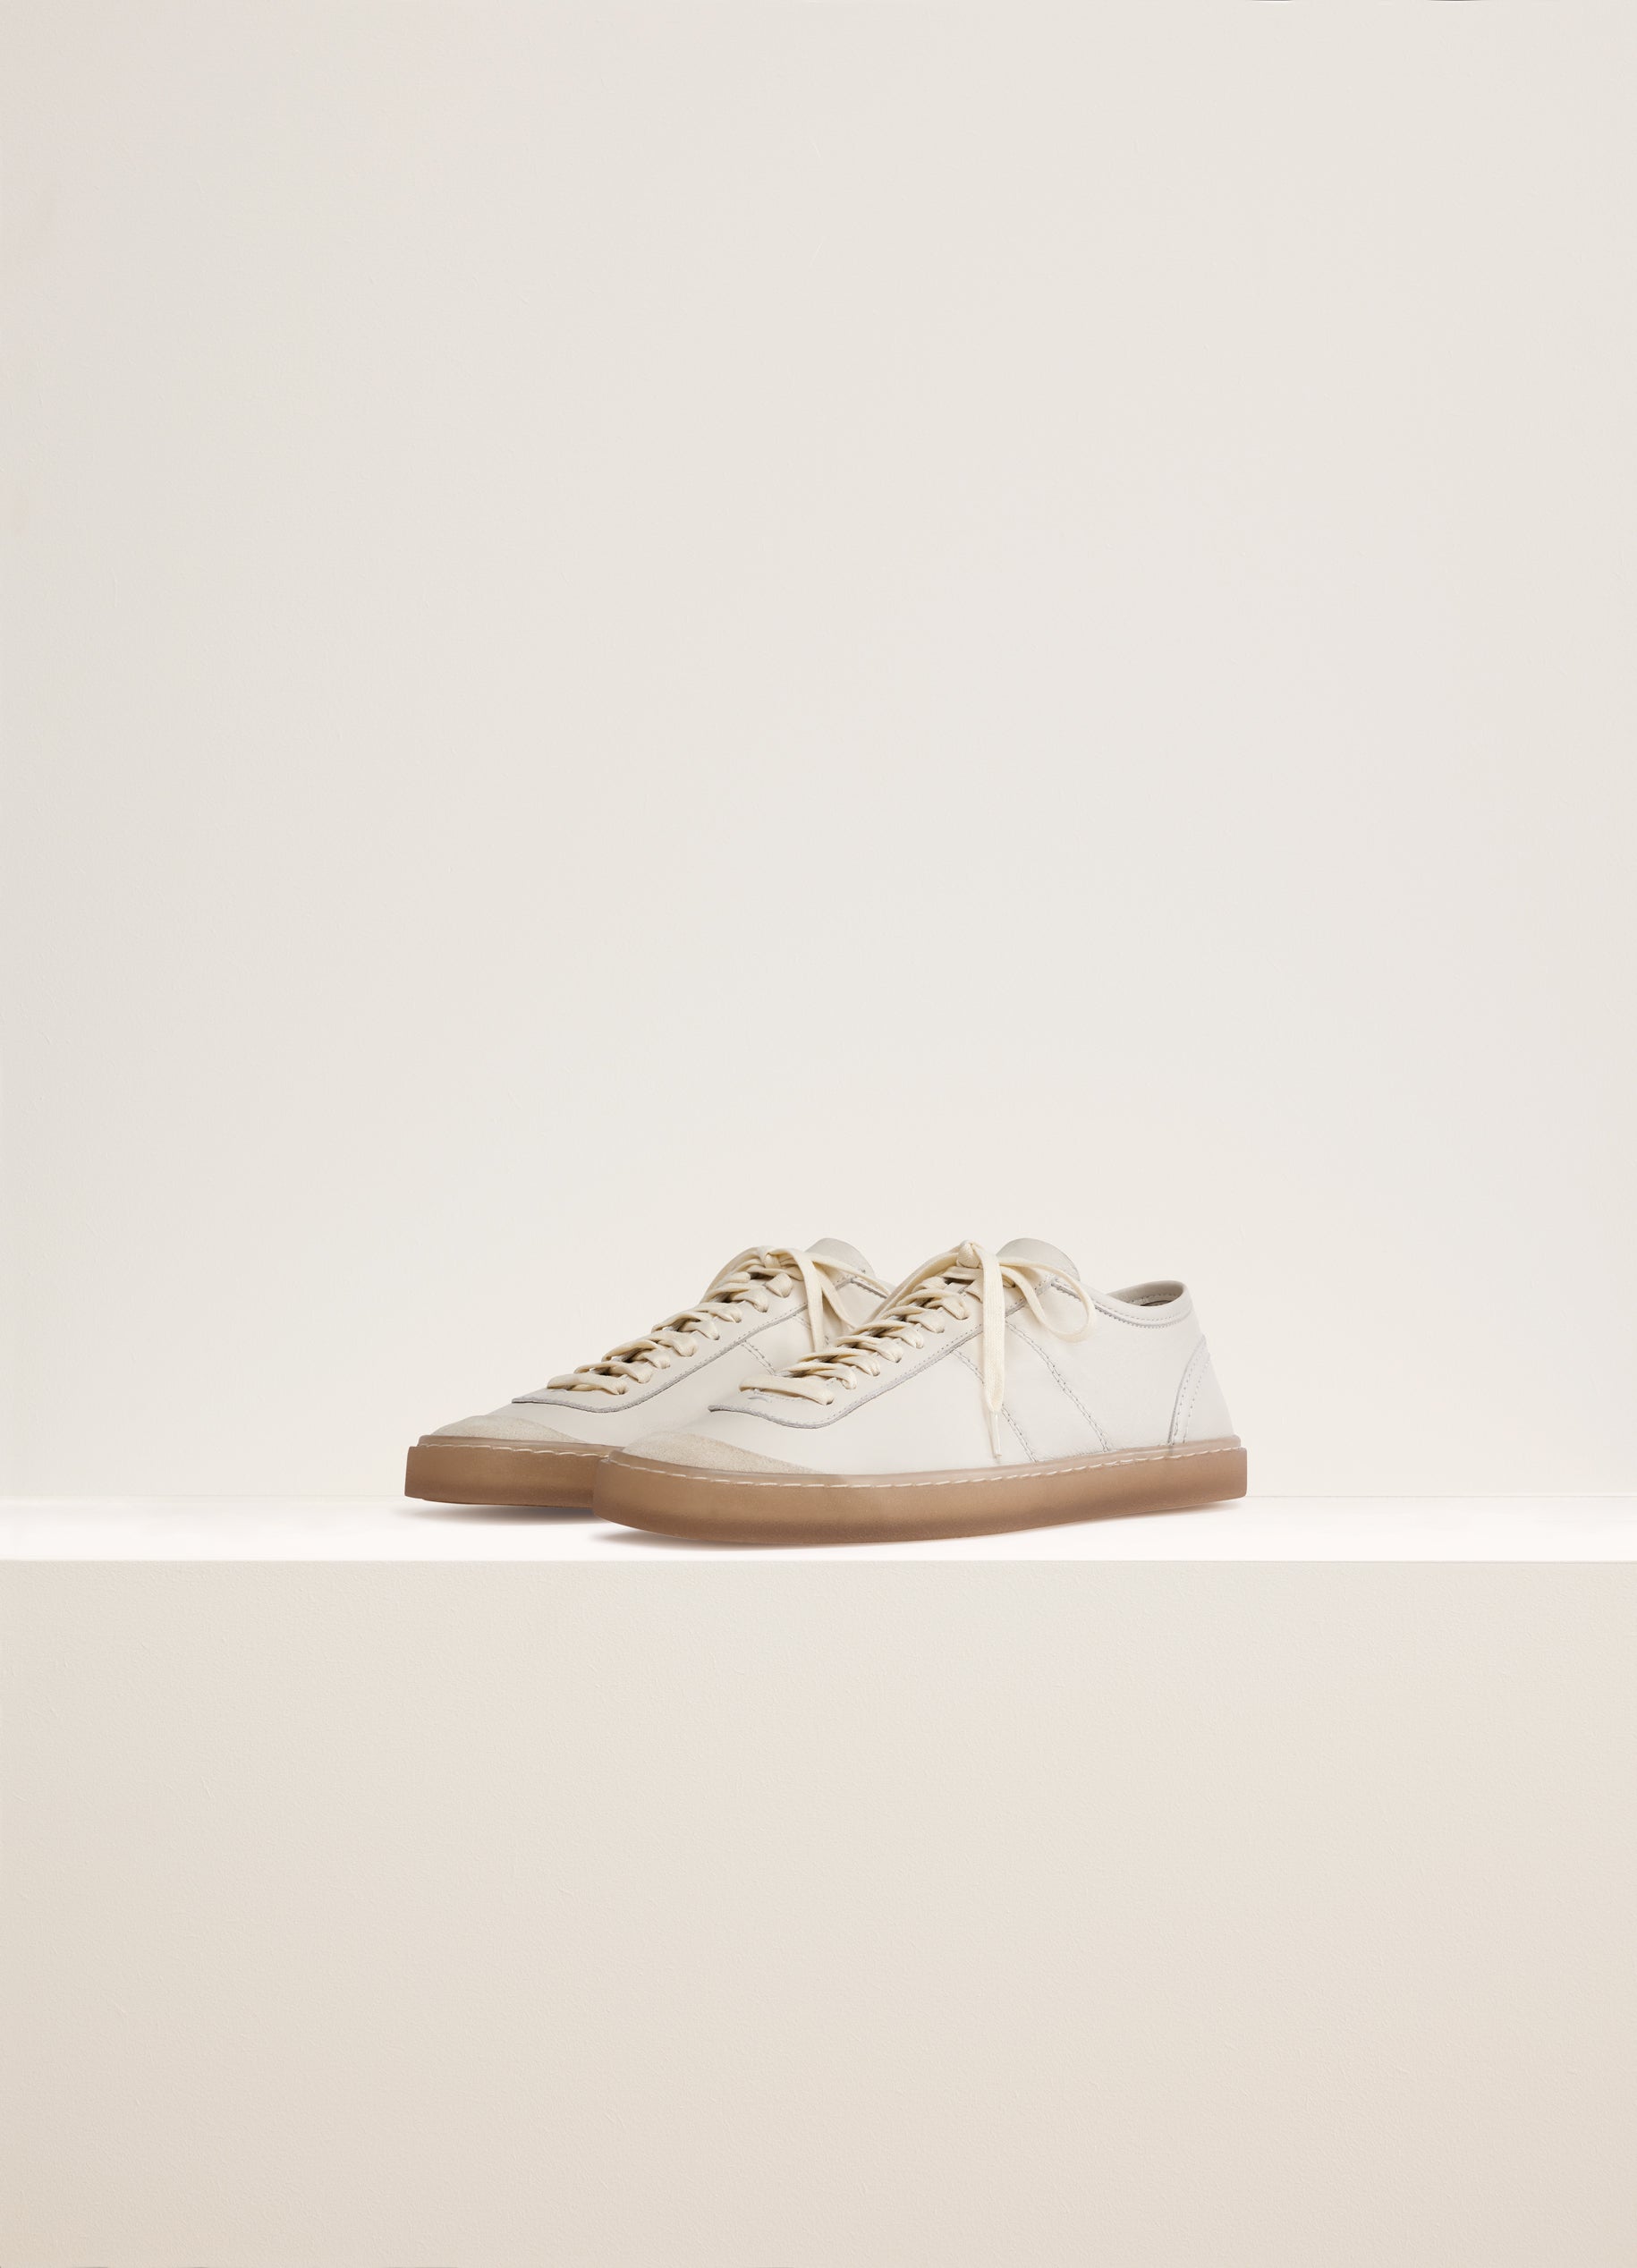 Clay White Linoleum Laced Up Trainers in Soft Leather | LEMAIRE | Sneaker high